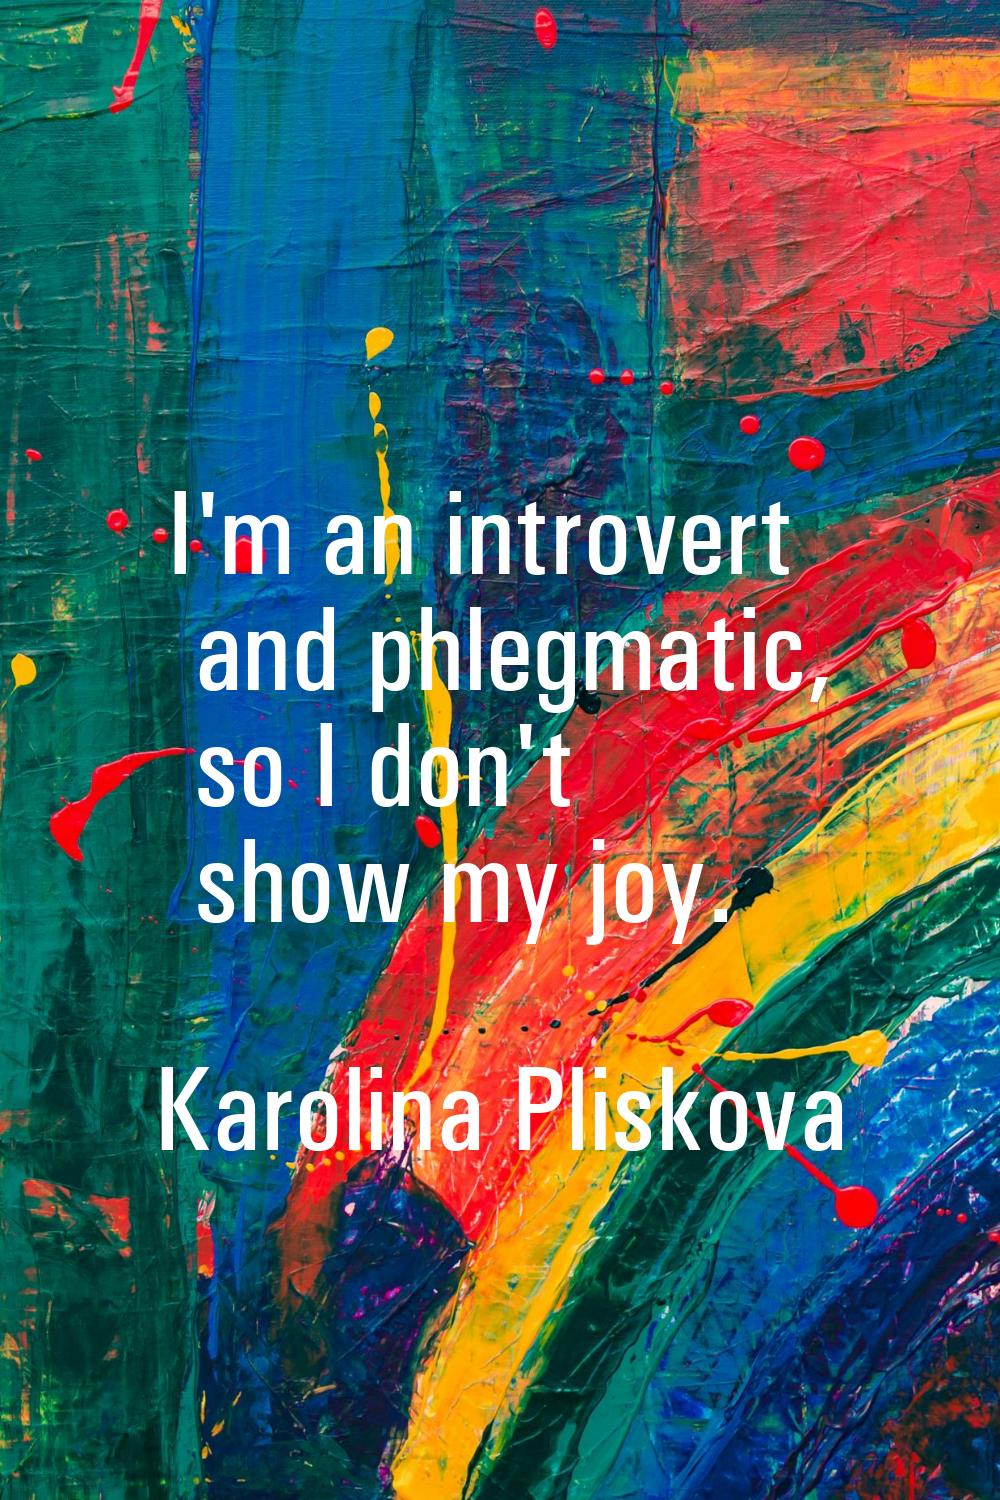 I'm an introvert and phlegmatic, so I don't show my joy.